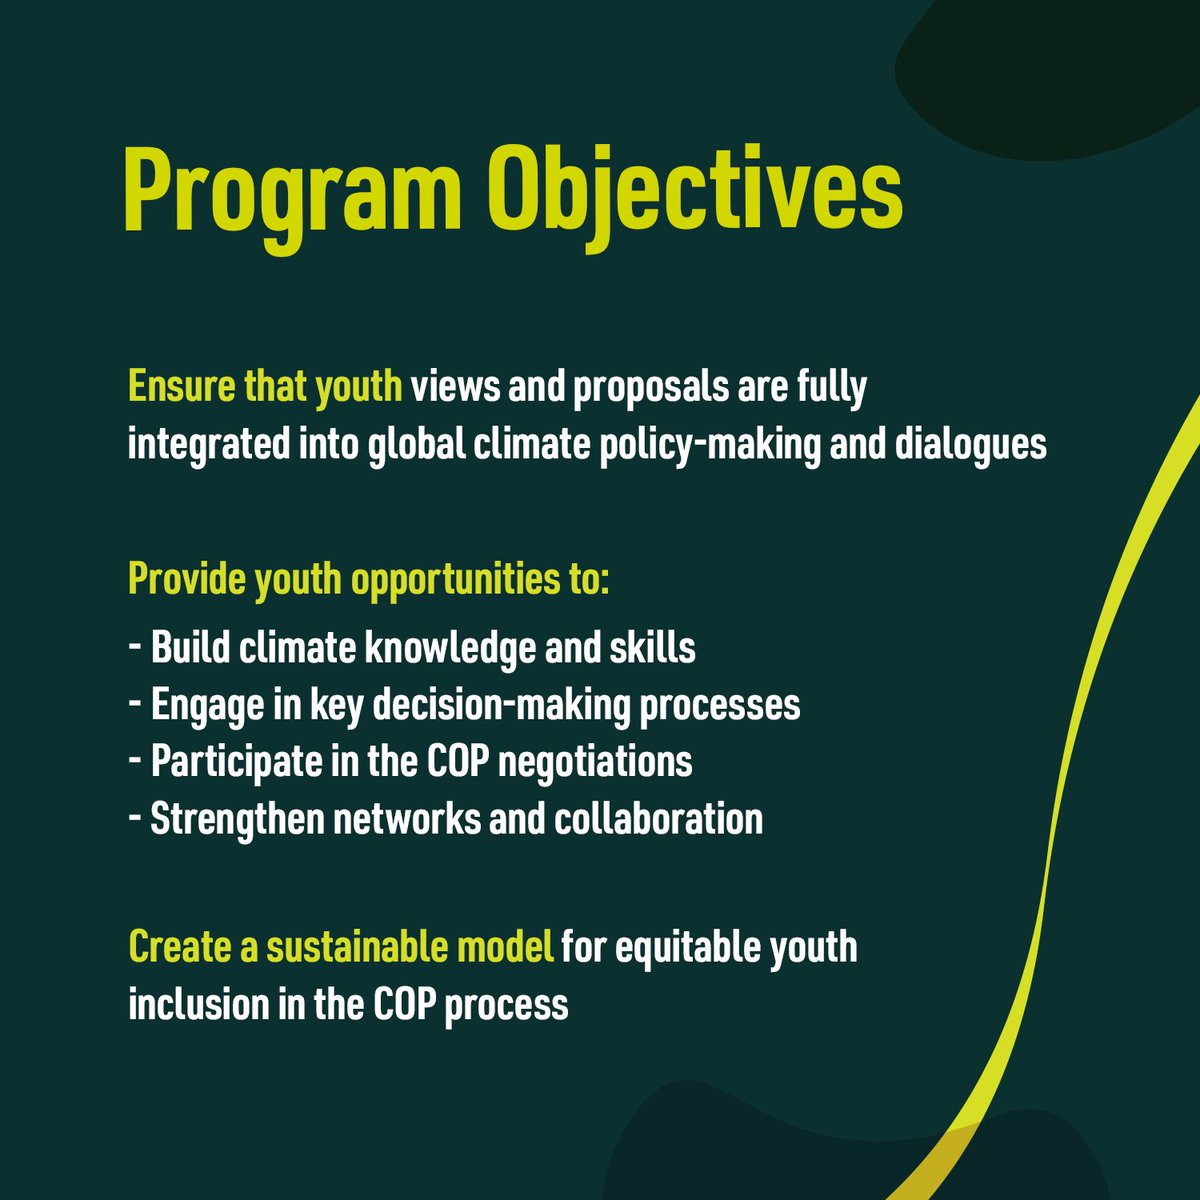 The International #YouthClimateDelegate Program launched by @COP28_UAE and @IYCM will meaningfully engage 100 young people in climate negotiation, prioritizing delegates from LDCs, SIDS, indigenous peoples & minority groups. Apply now! bit.ly/Delegate-Progr…